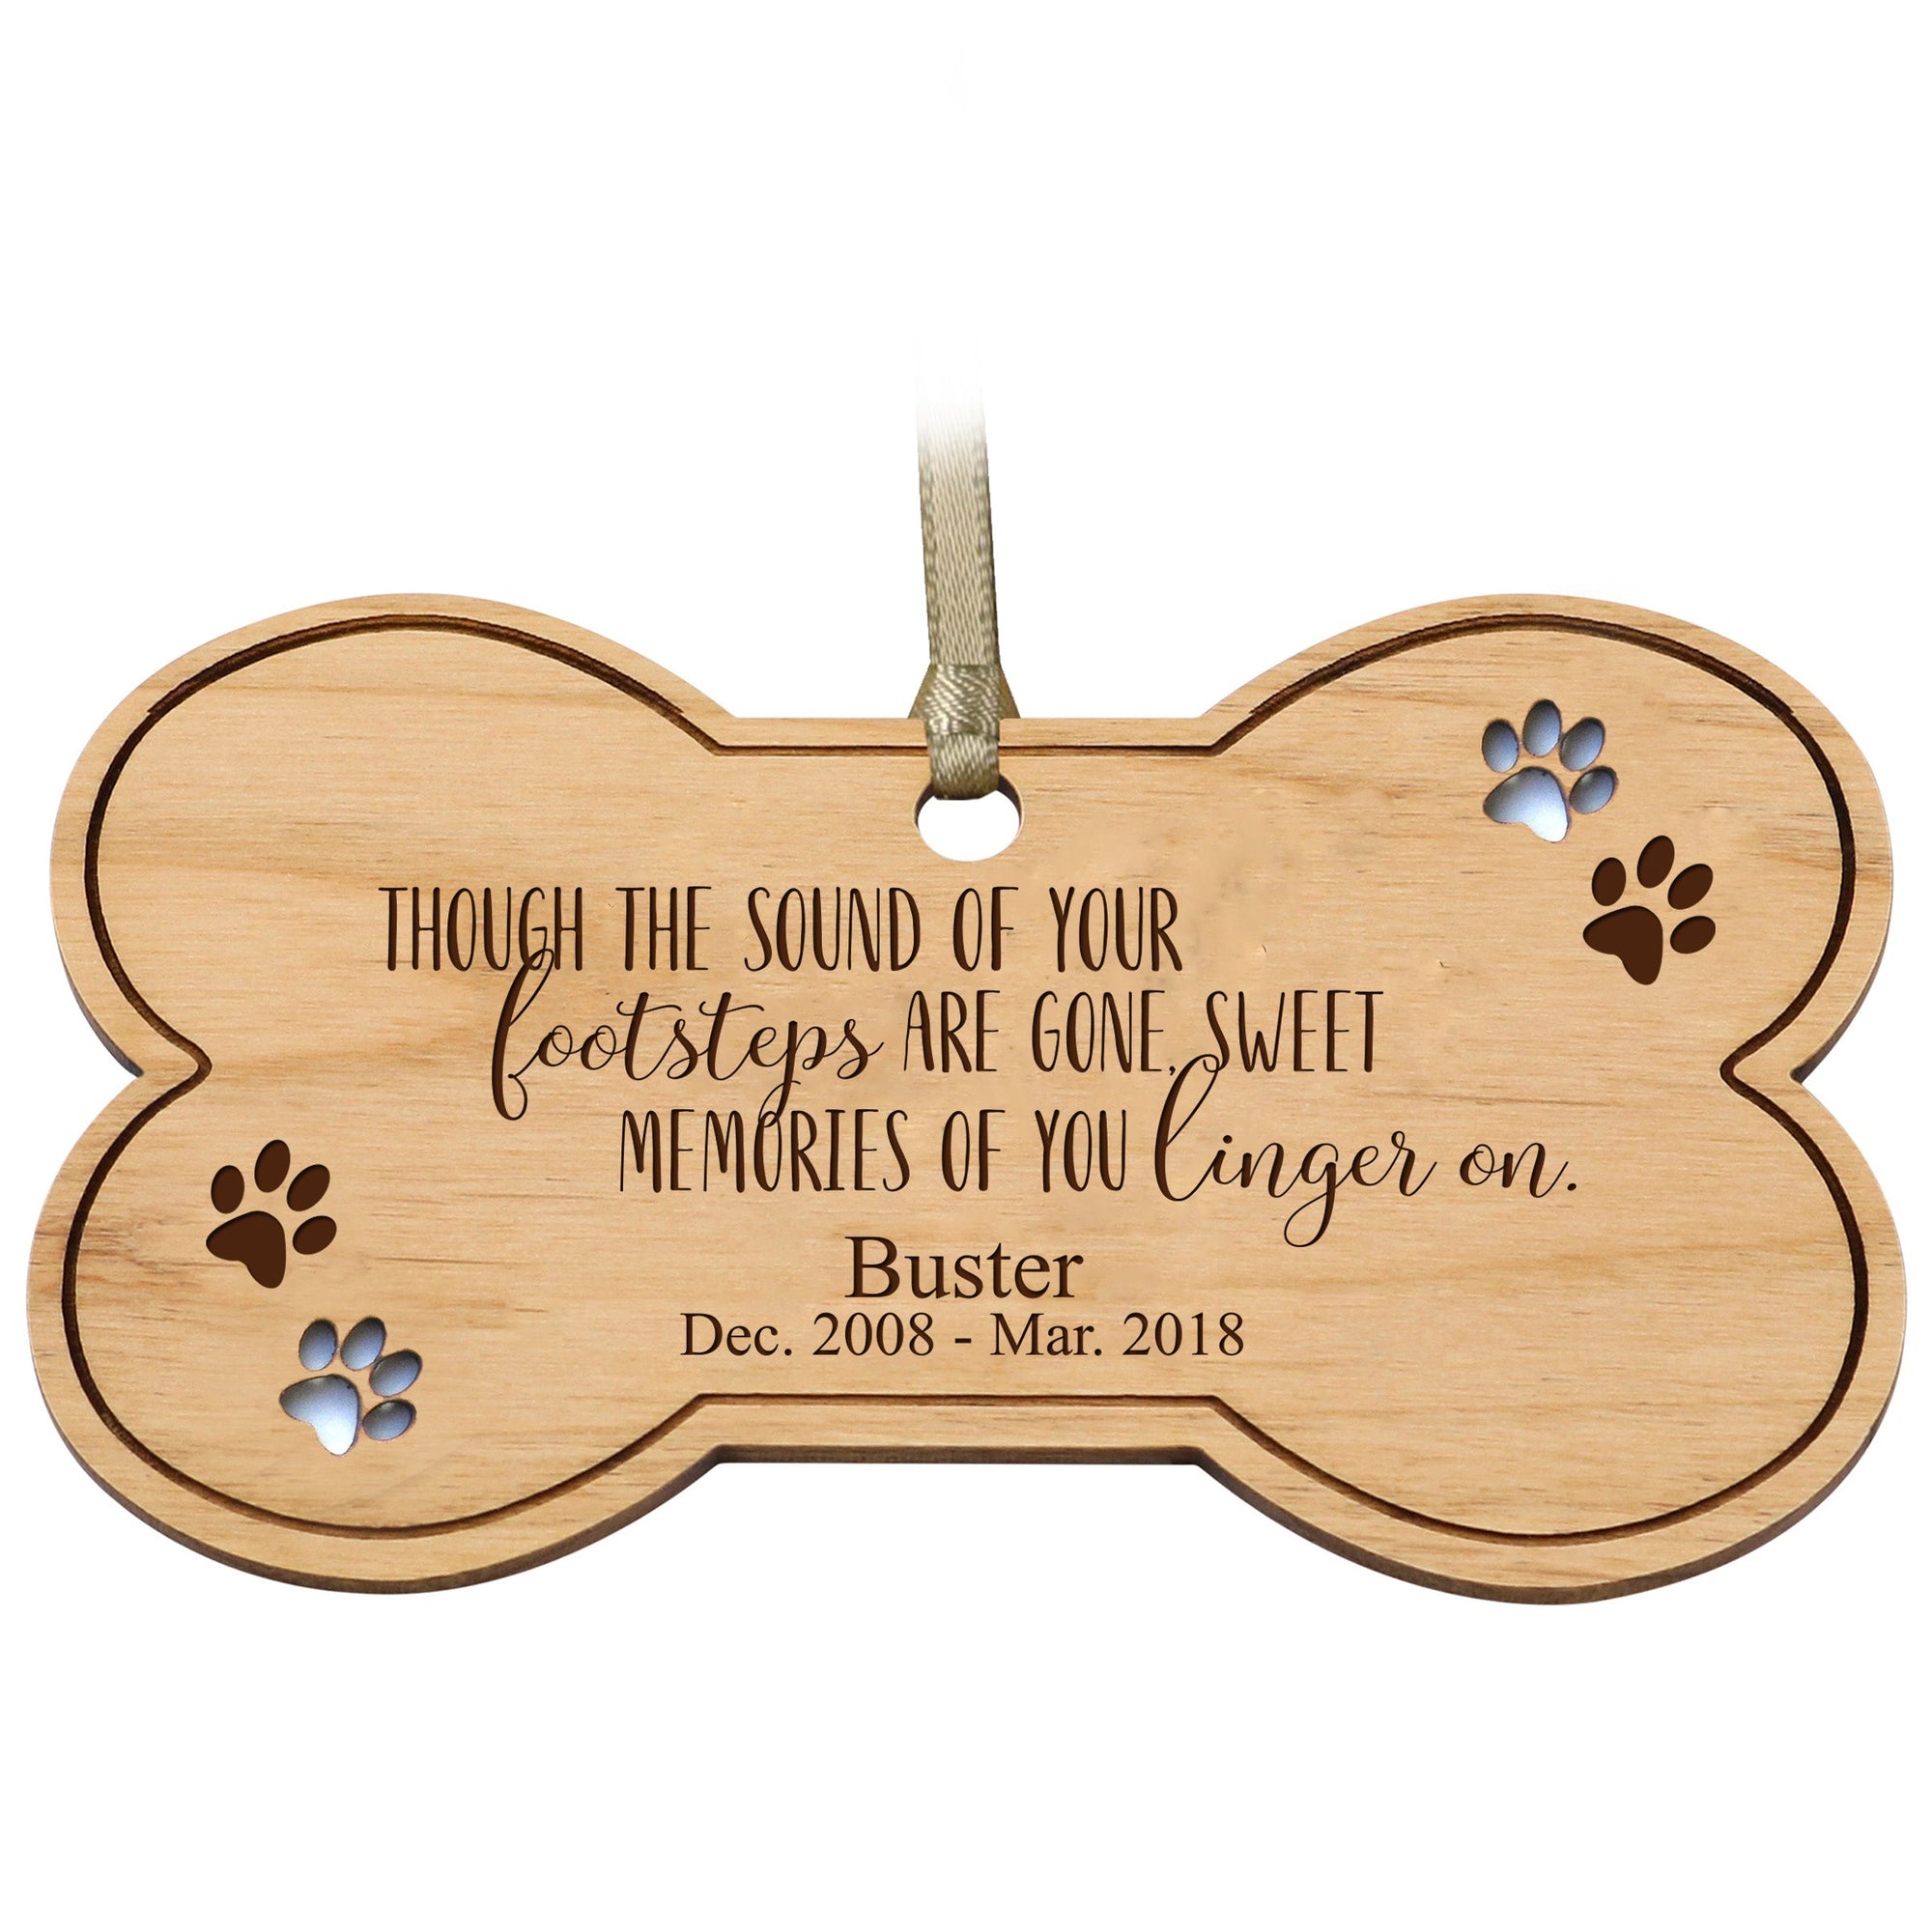 Pet Memorial Wooden Bone Ornament - Though The Sound Of Your Footsteps